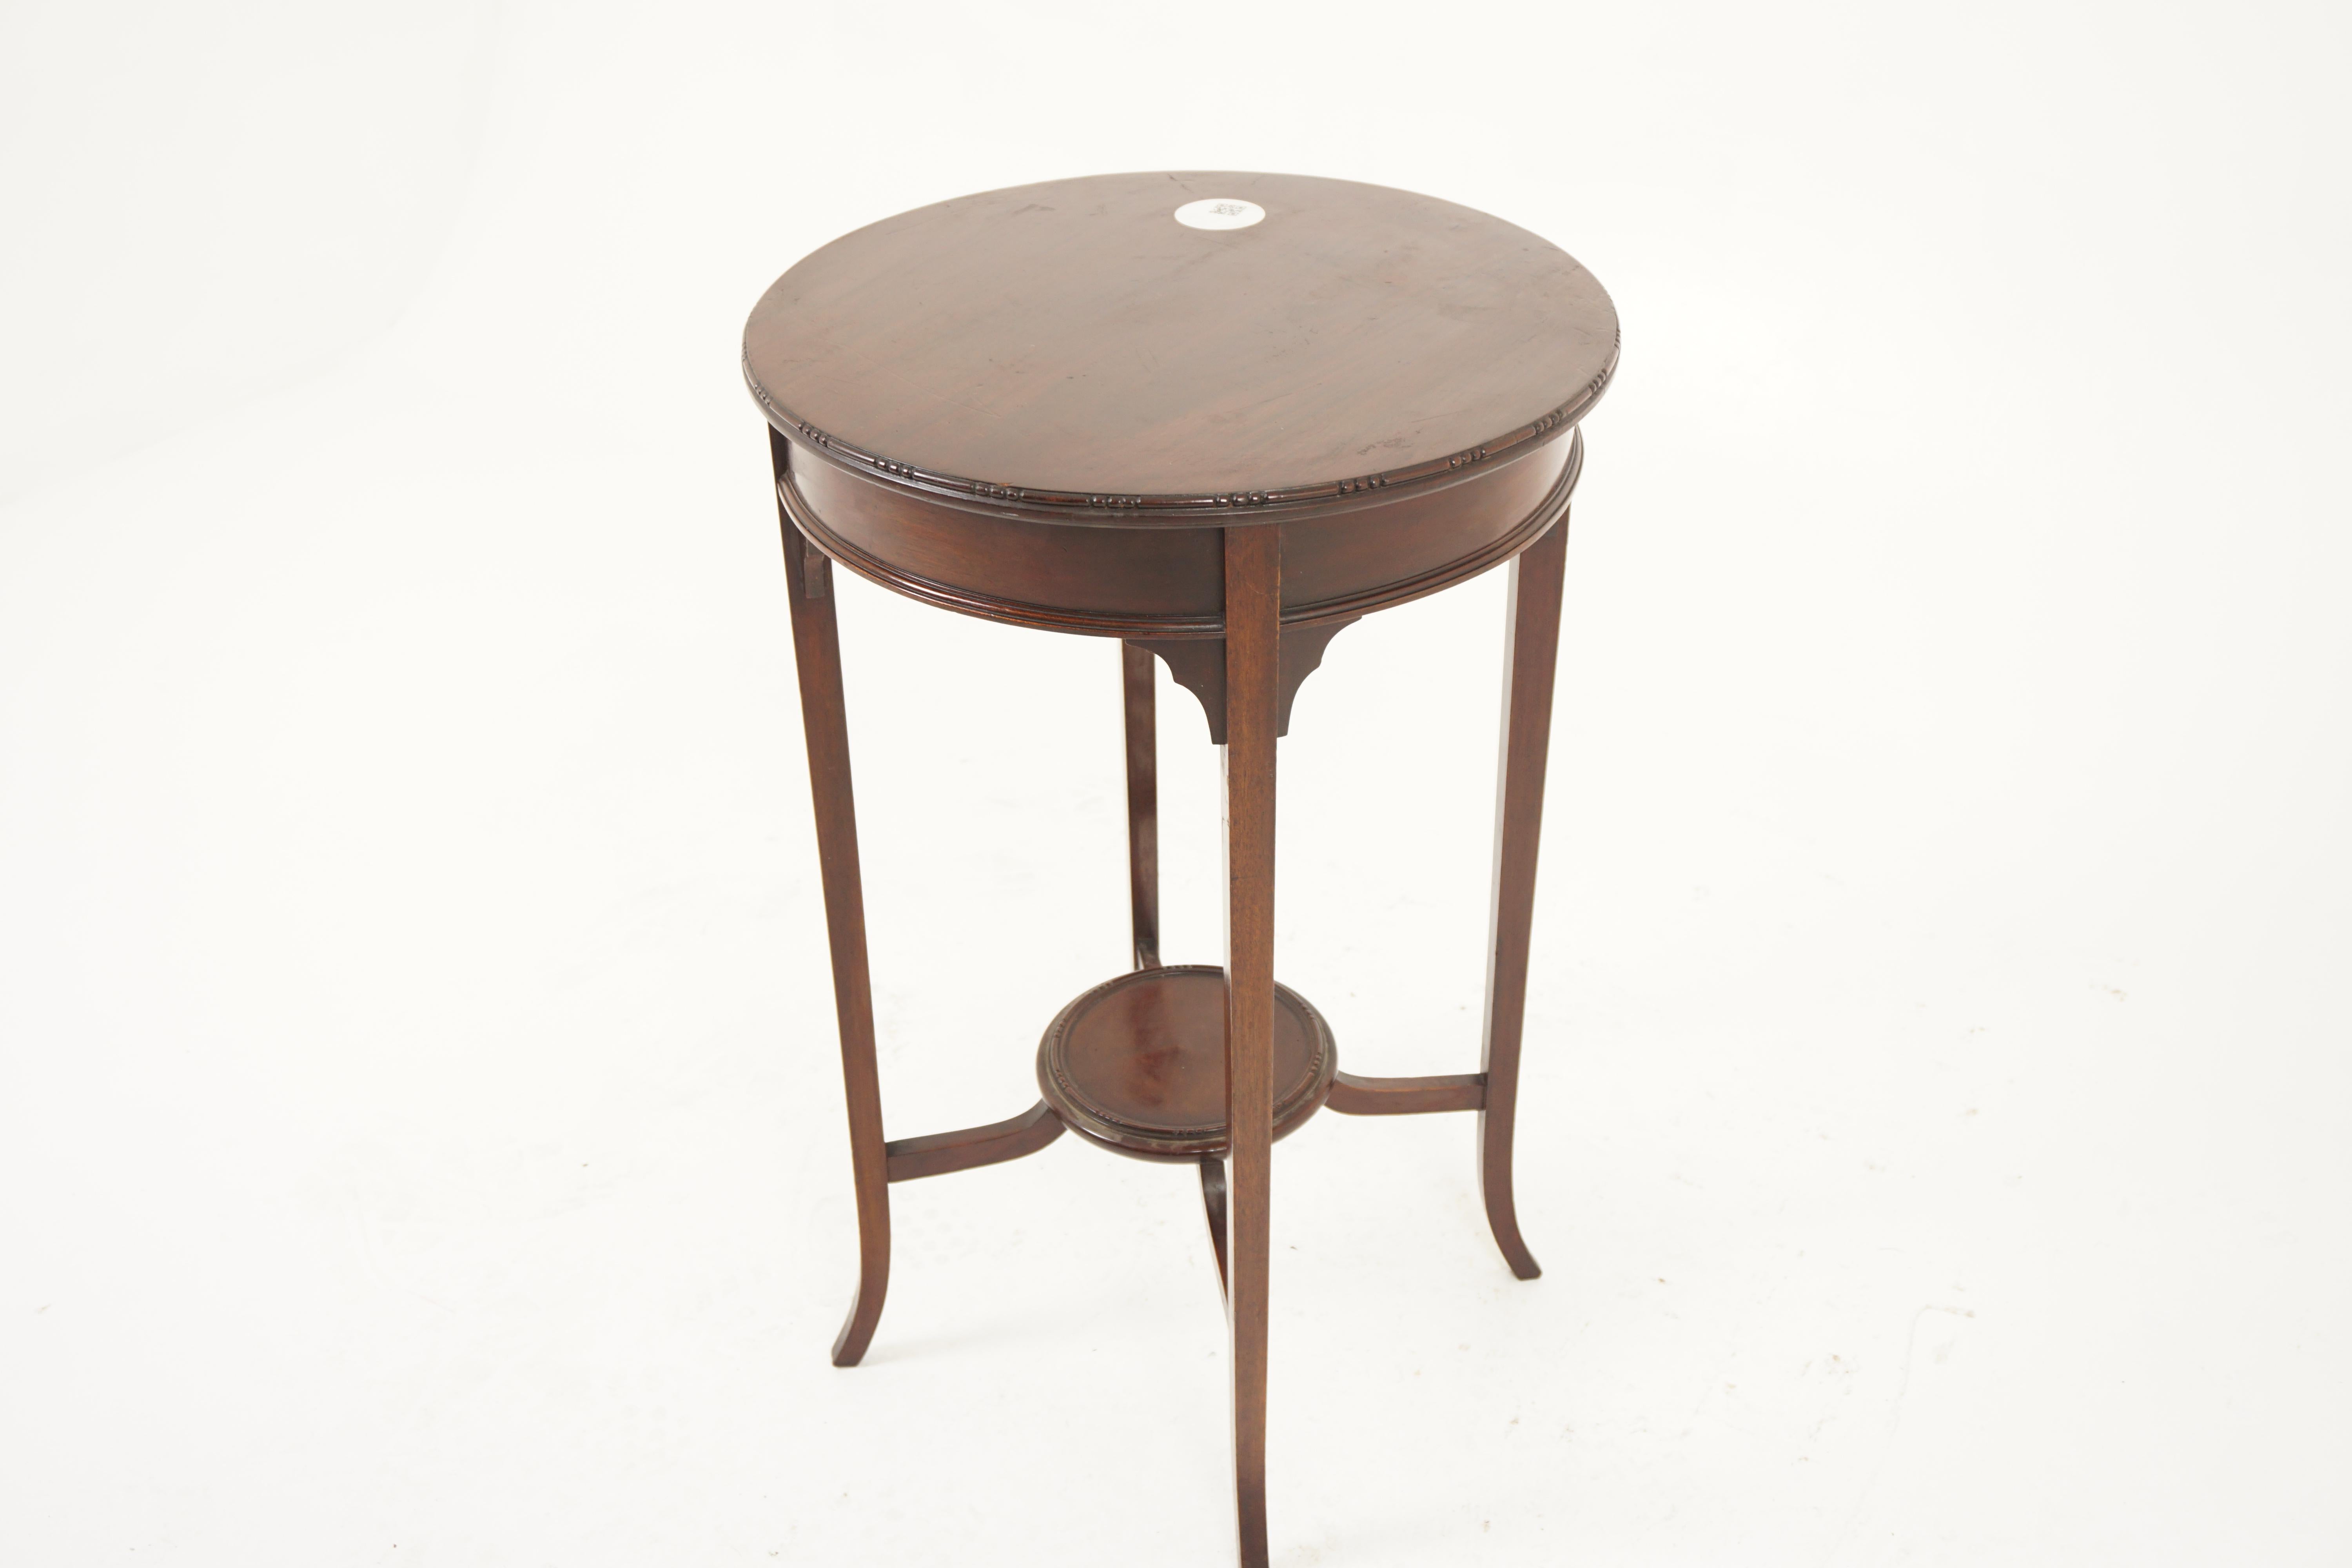 Antique Walnut Table, Sheraton Style Two-Tiered Circular Occasional Table, Antique Furniture, Scotland 1900, H1125

+ Scotland 1900
+ Solid Walnut
+ Original Finish
+ Solid circular top with carved moulded edge
+ Simple frieze below
+ With